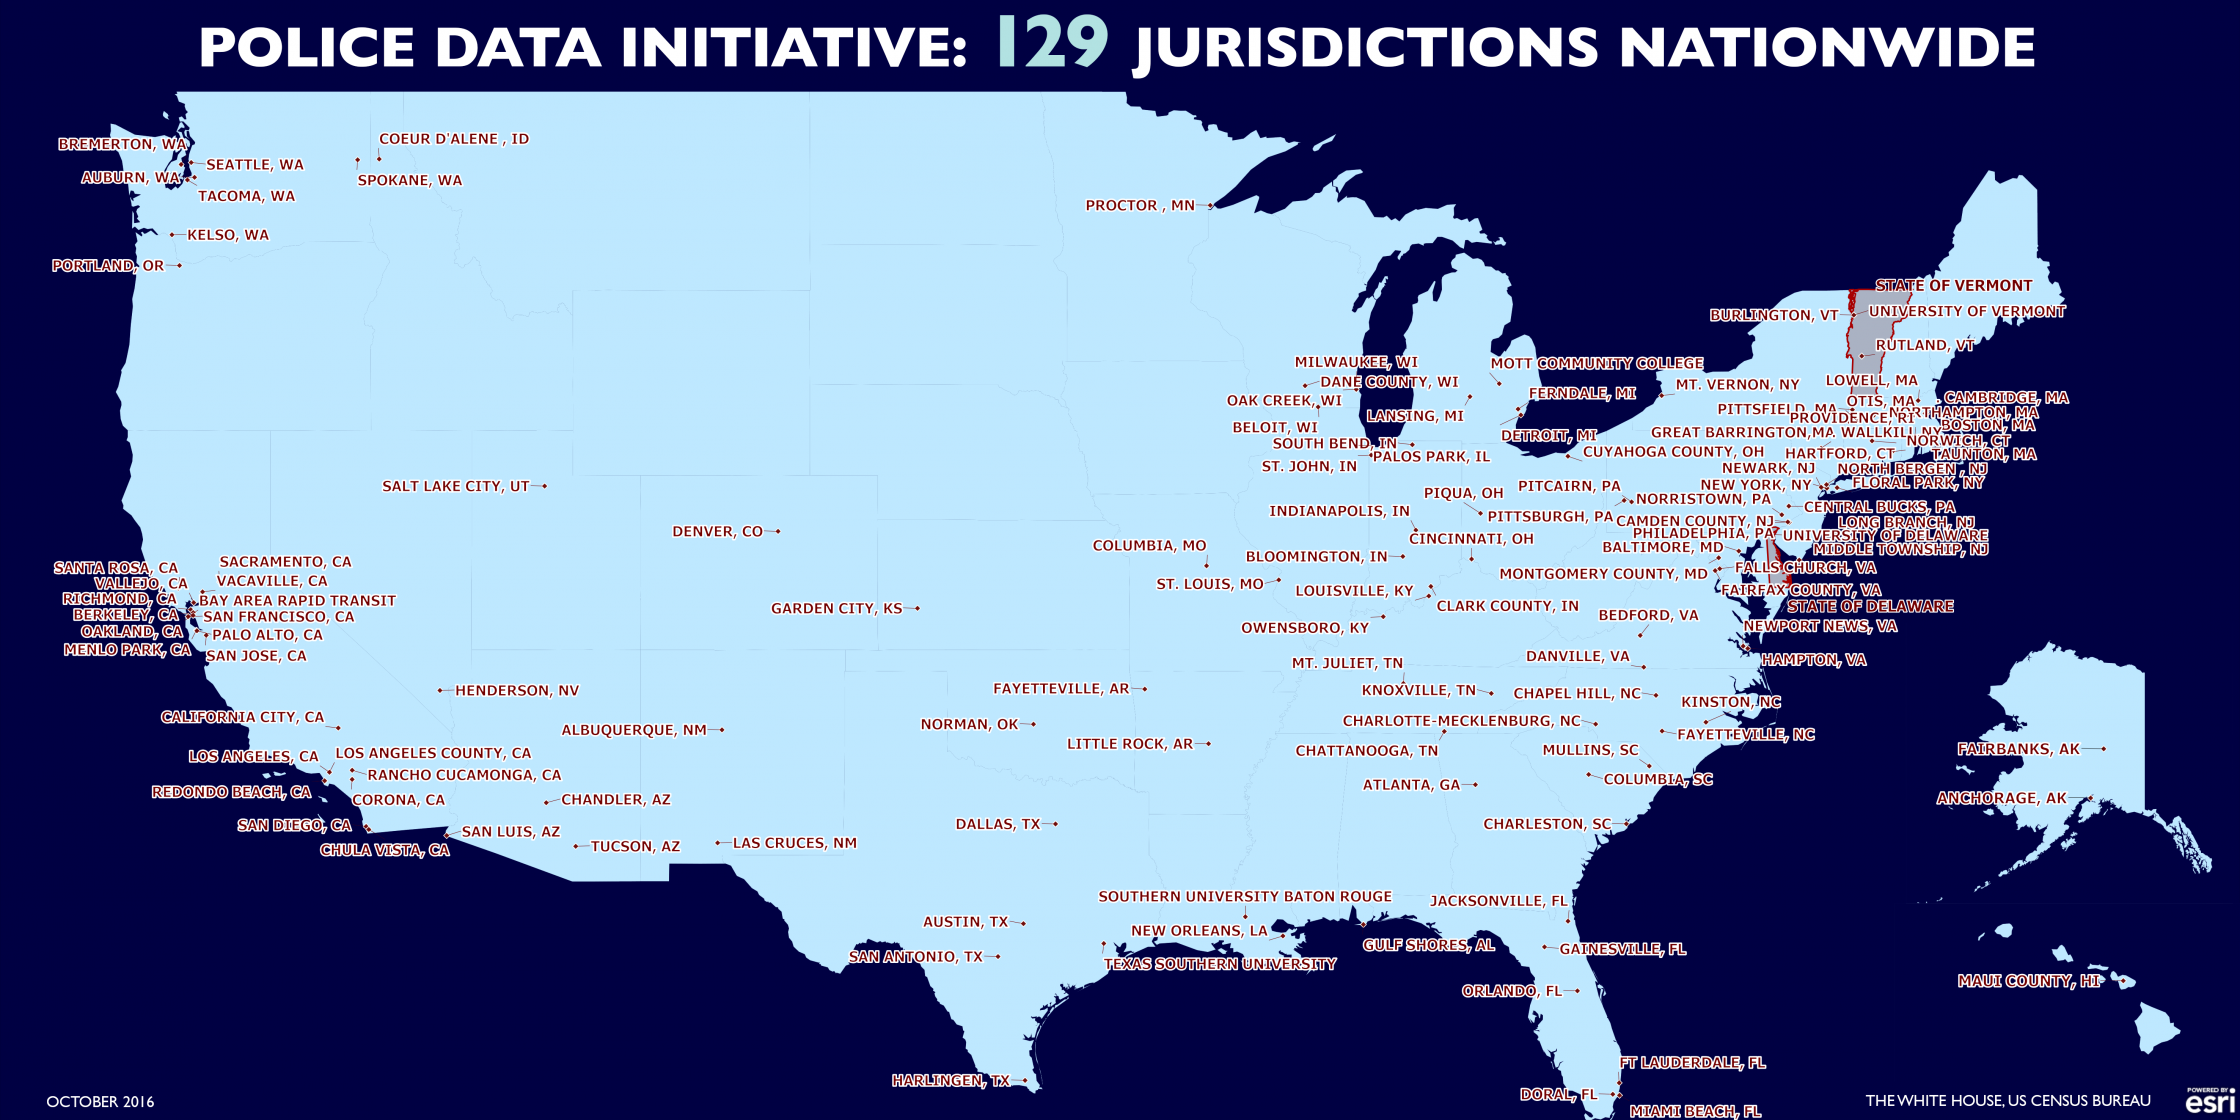 US Map: Police Data Initiative: 129 Jurisdictions Nationwide. See download in caption for data. 